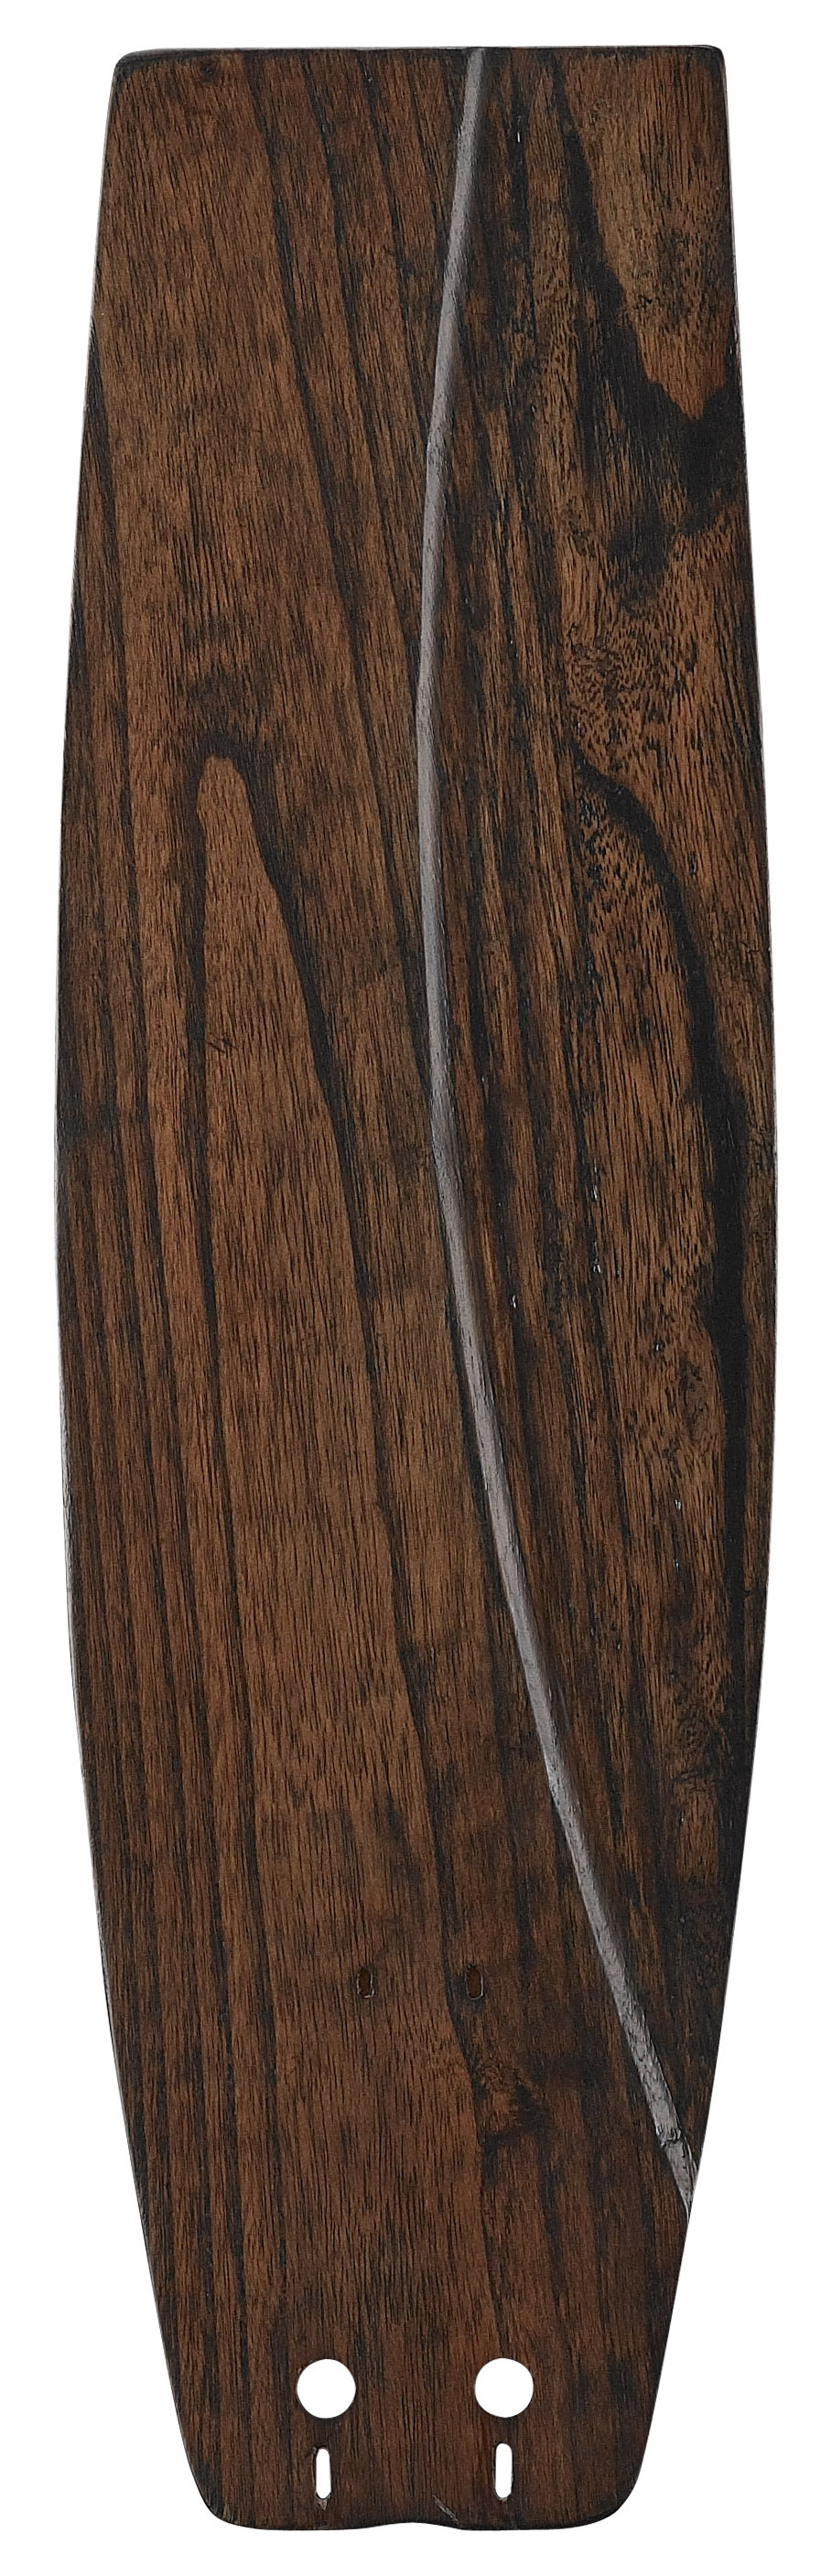 22 Inch Soft Rounded Carved Wood - Wa